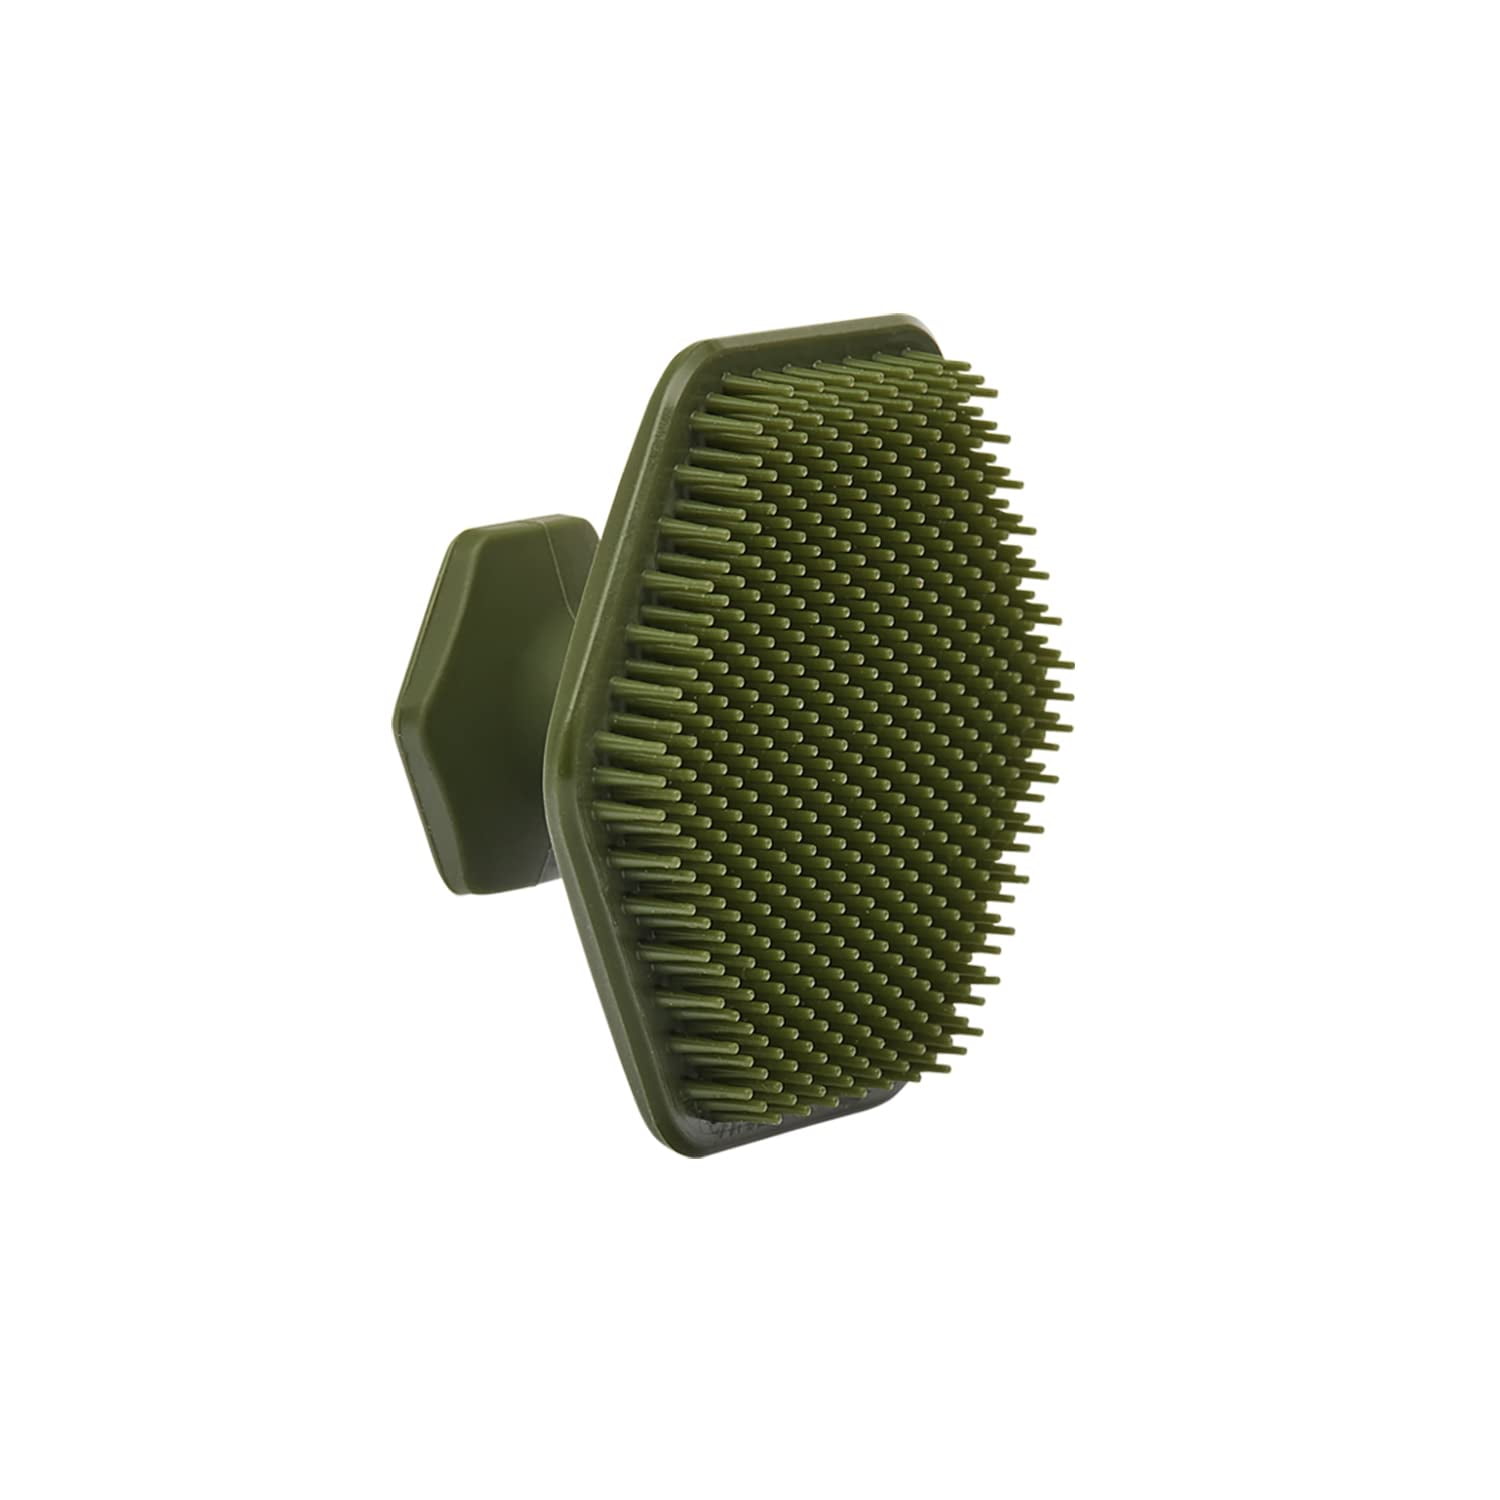 u2013 Silicone Face Scrubber - Gentle Exfoliator Pad & Massager - Removes  Dead & Dry Skin \u2013 Invigorating Addition to Grooming Routine -  Soft-Touch Shower & Bathroom Accessory - Army Green 